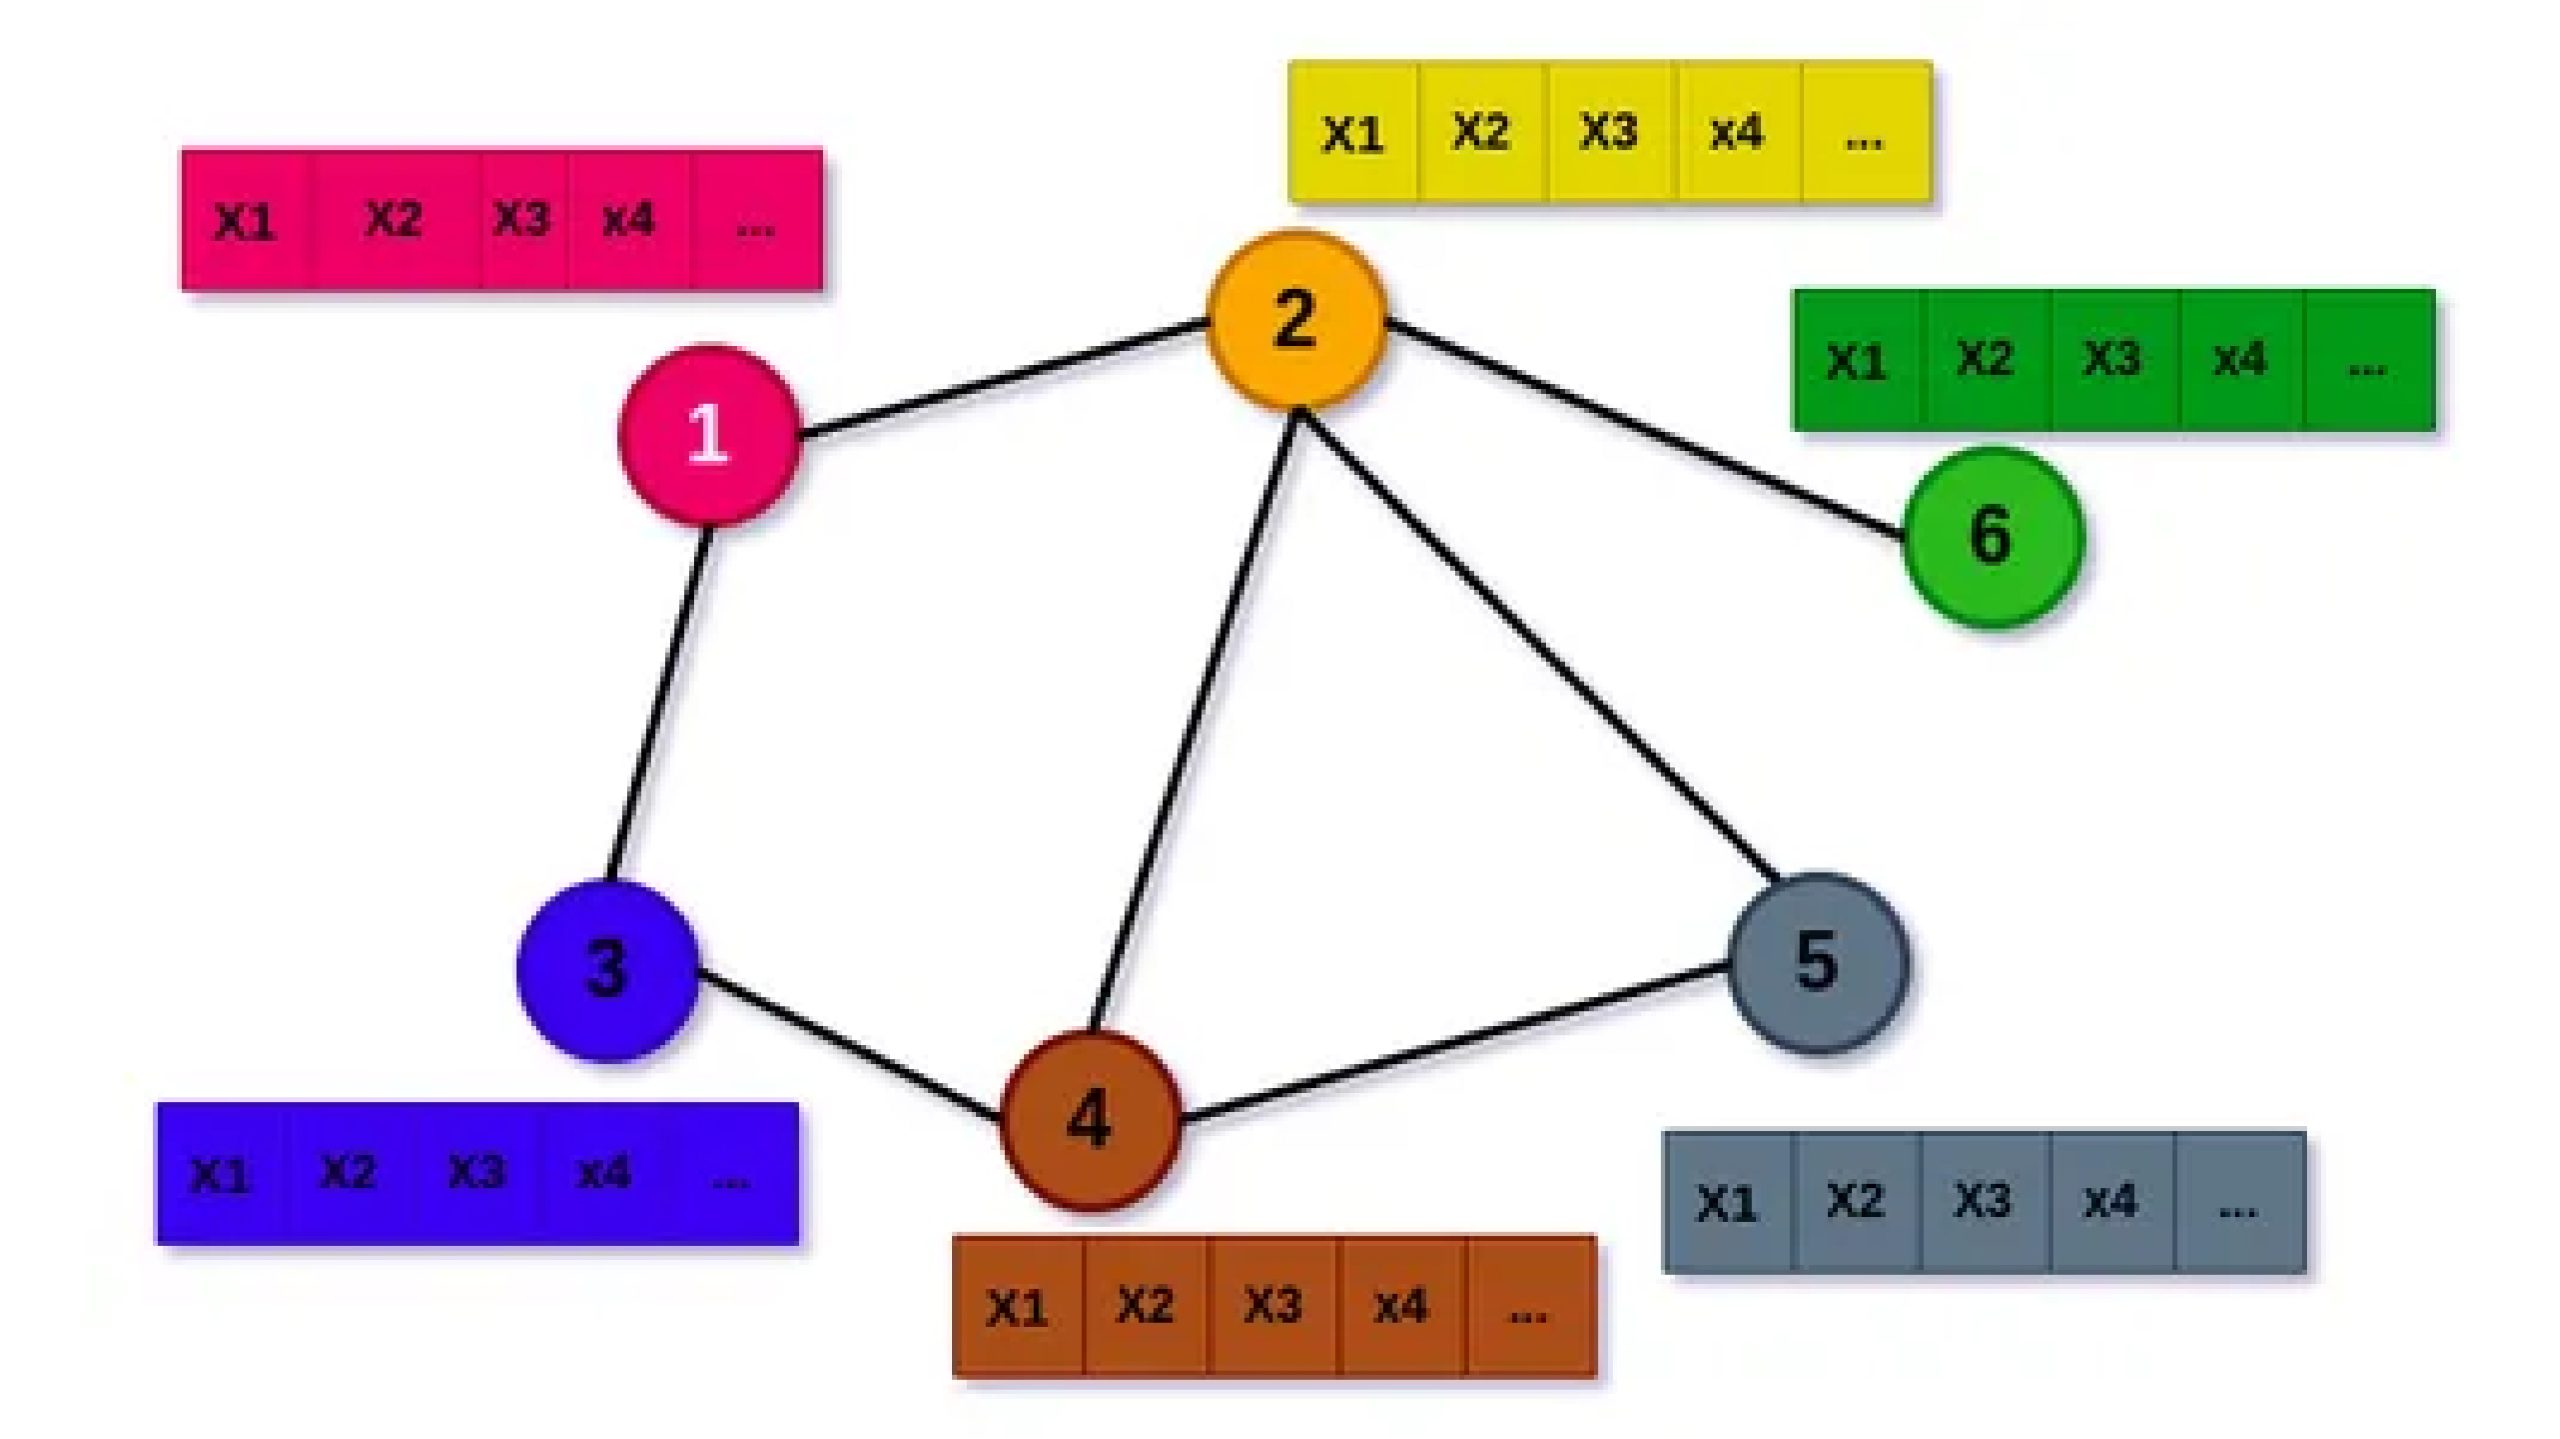 Mastering Graph Neural Networks